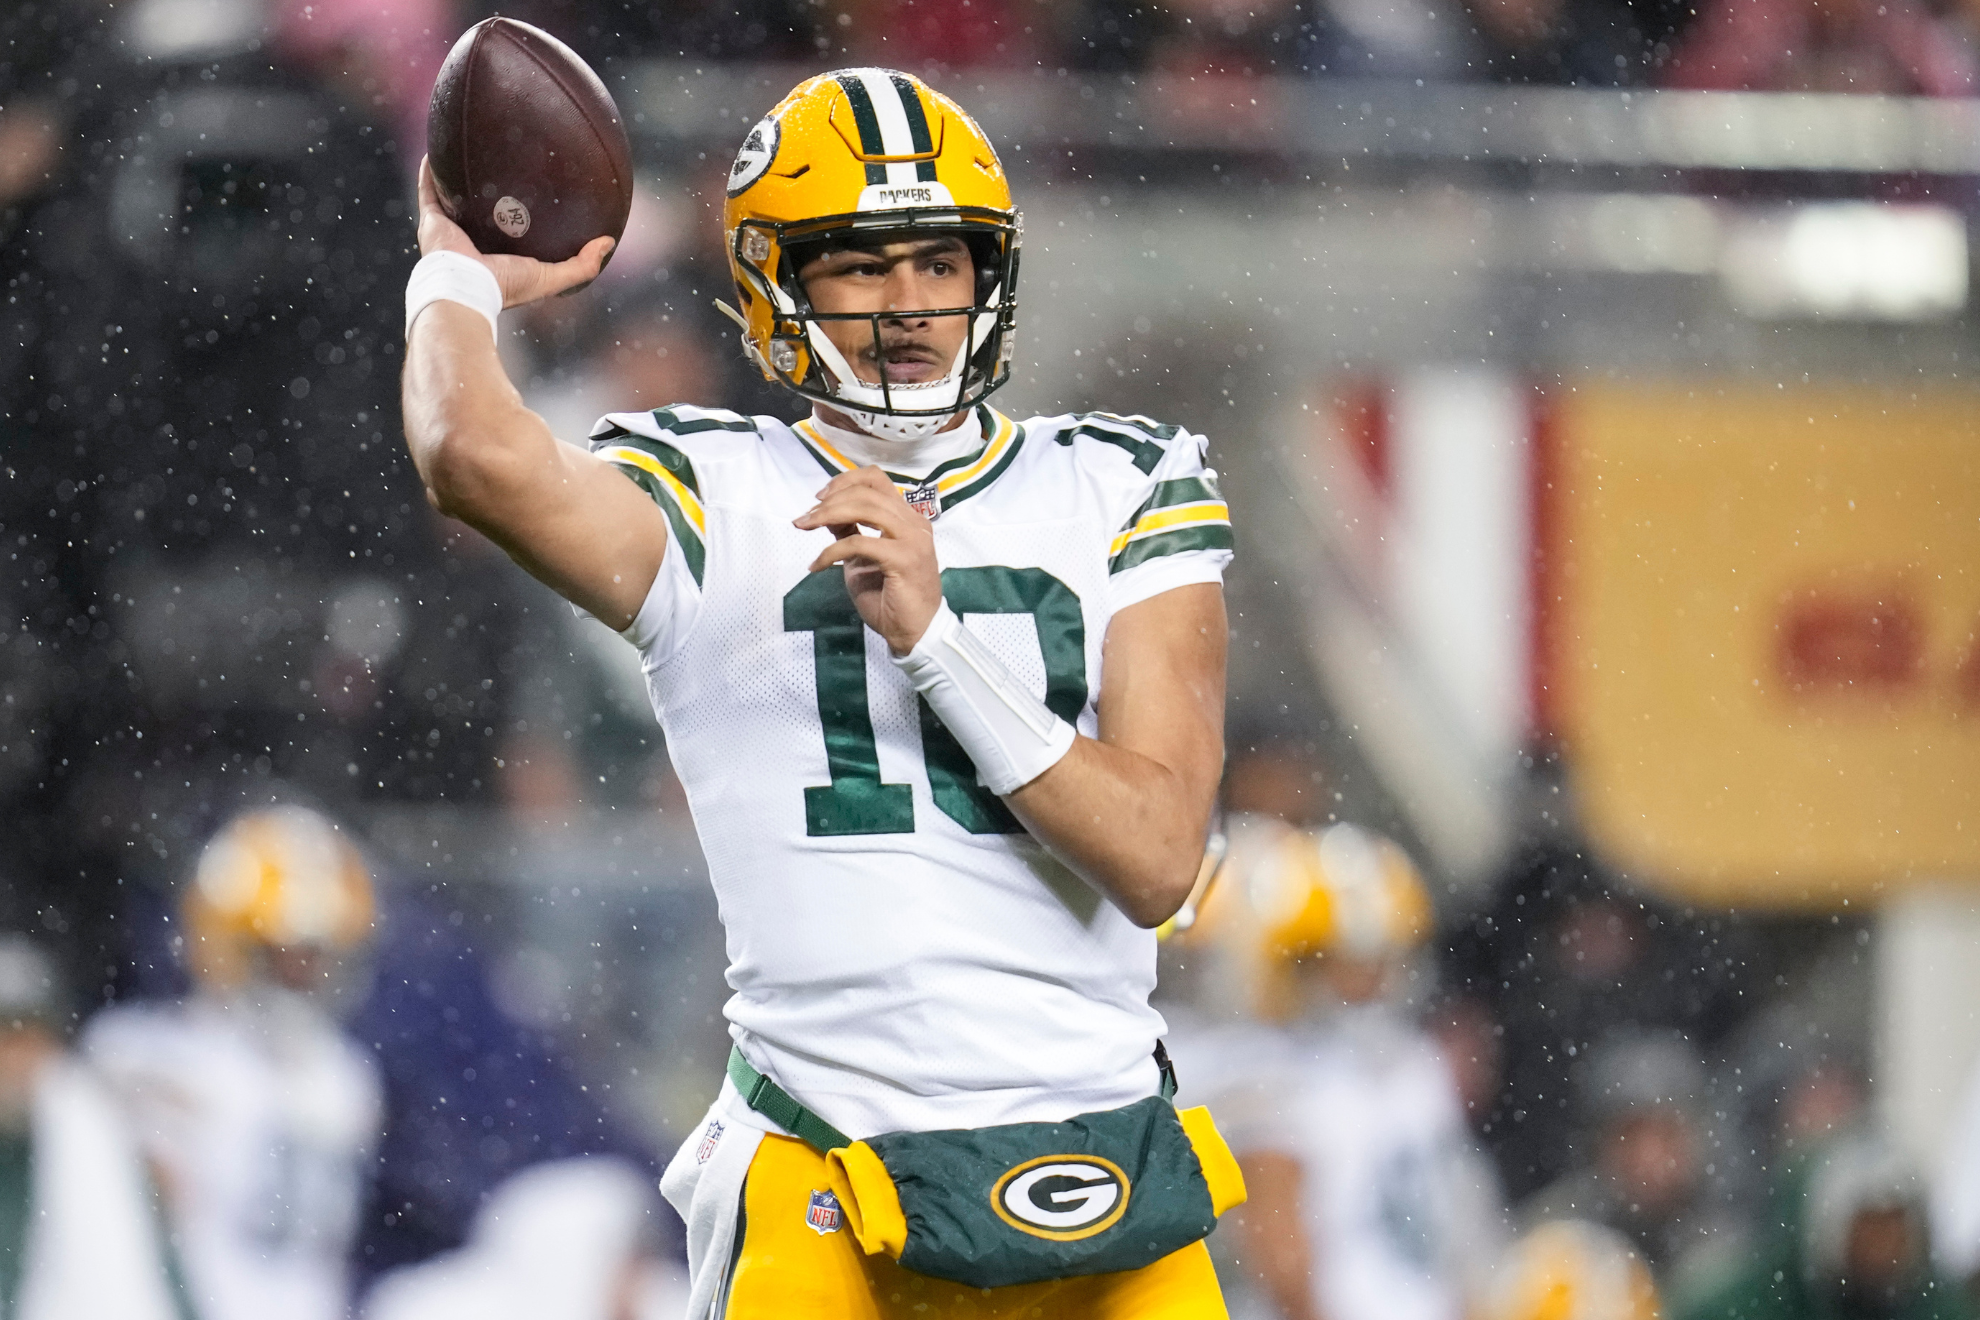 Love led the Packers past the Cowboys before a slim loss to the 49ers on Saturday.